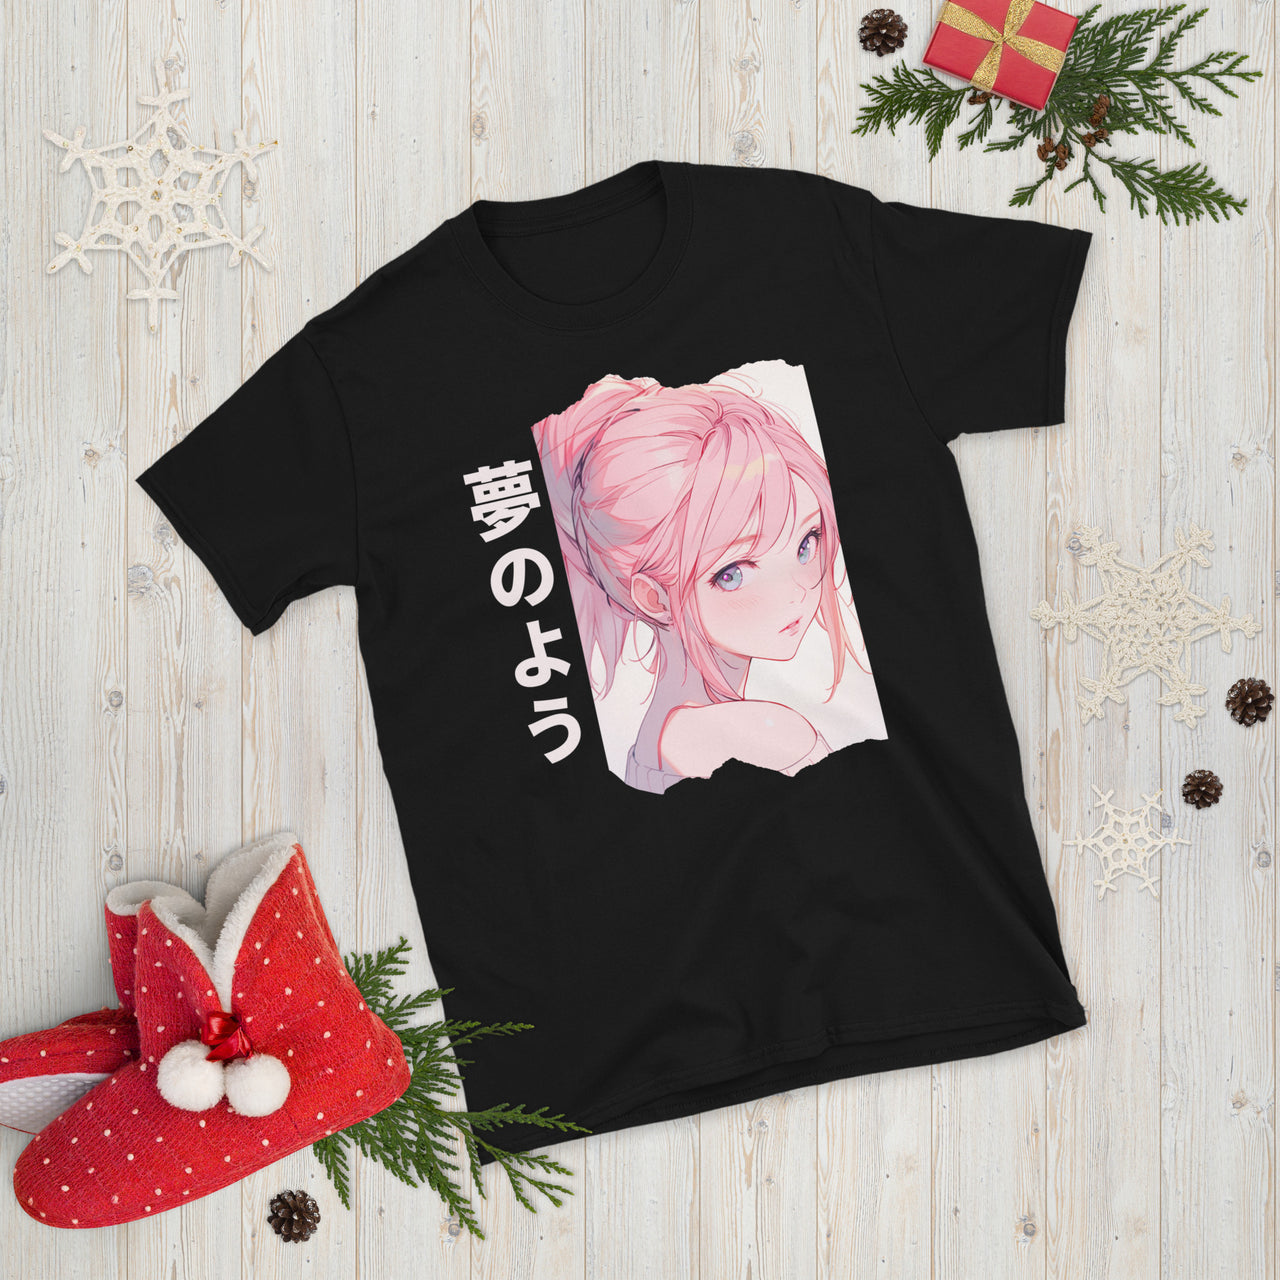 Dreamy Anime Girl with Pink Hair T-Shirt